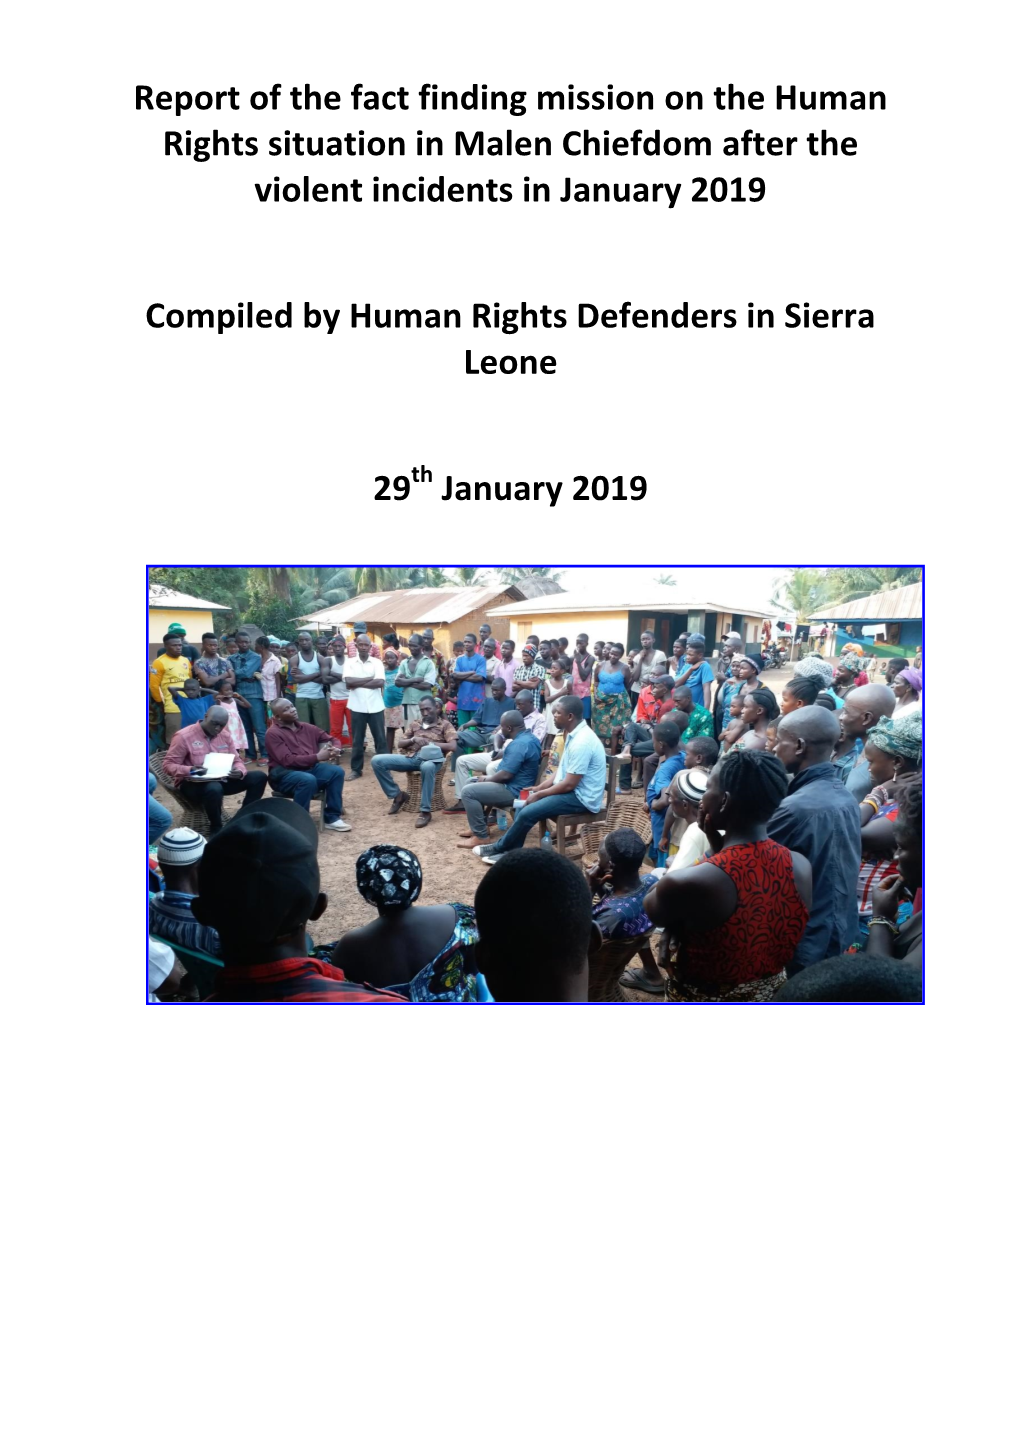 Report of the Fact Finding Mission on the Human Rights Situation in Malen Chiefdom After the Violent Incidents in January 2019